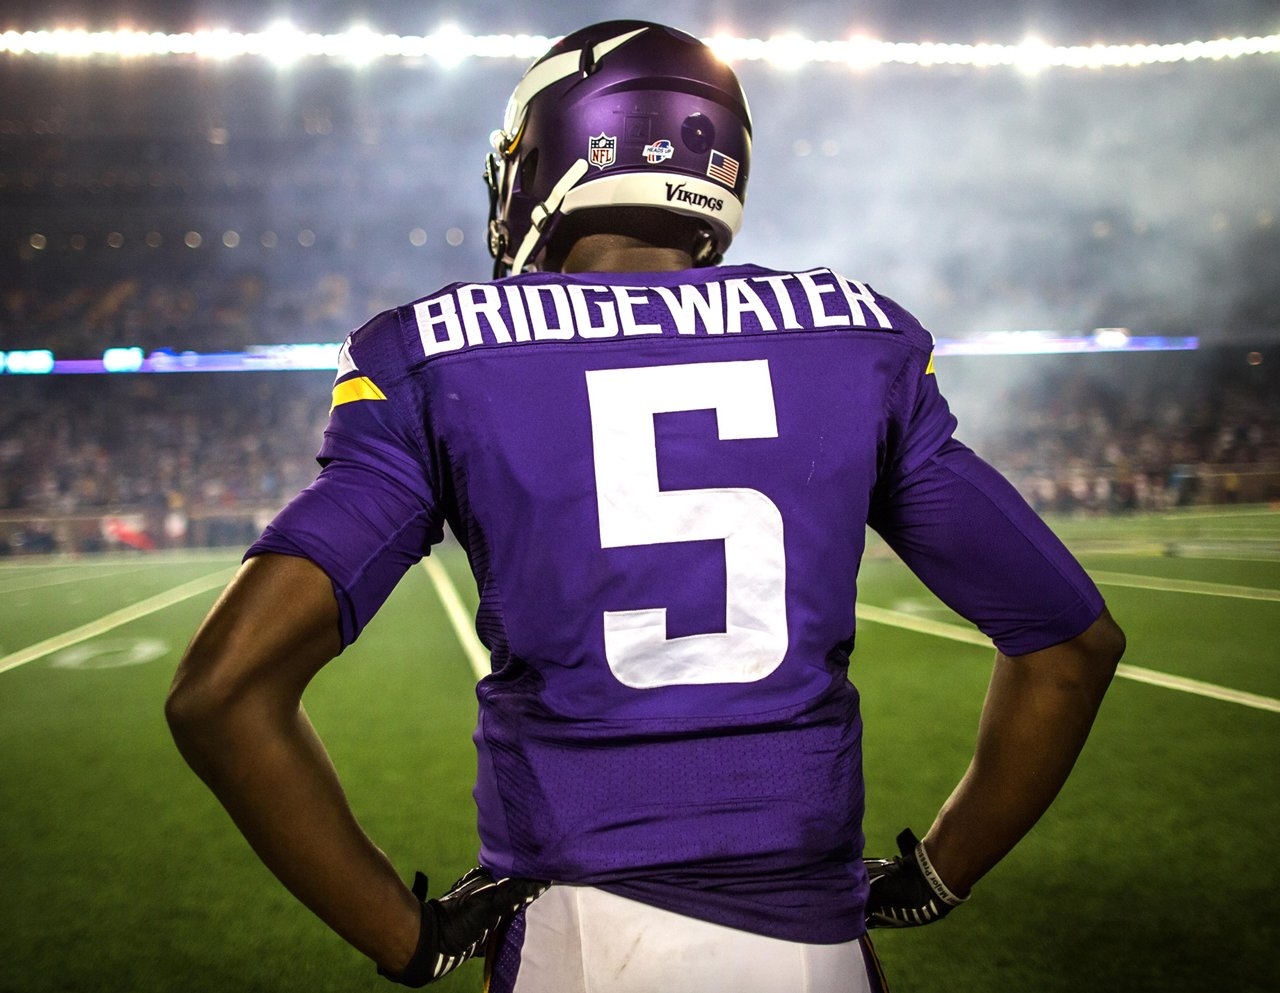 Bridgewater done for season, torn ACL